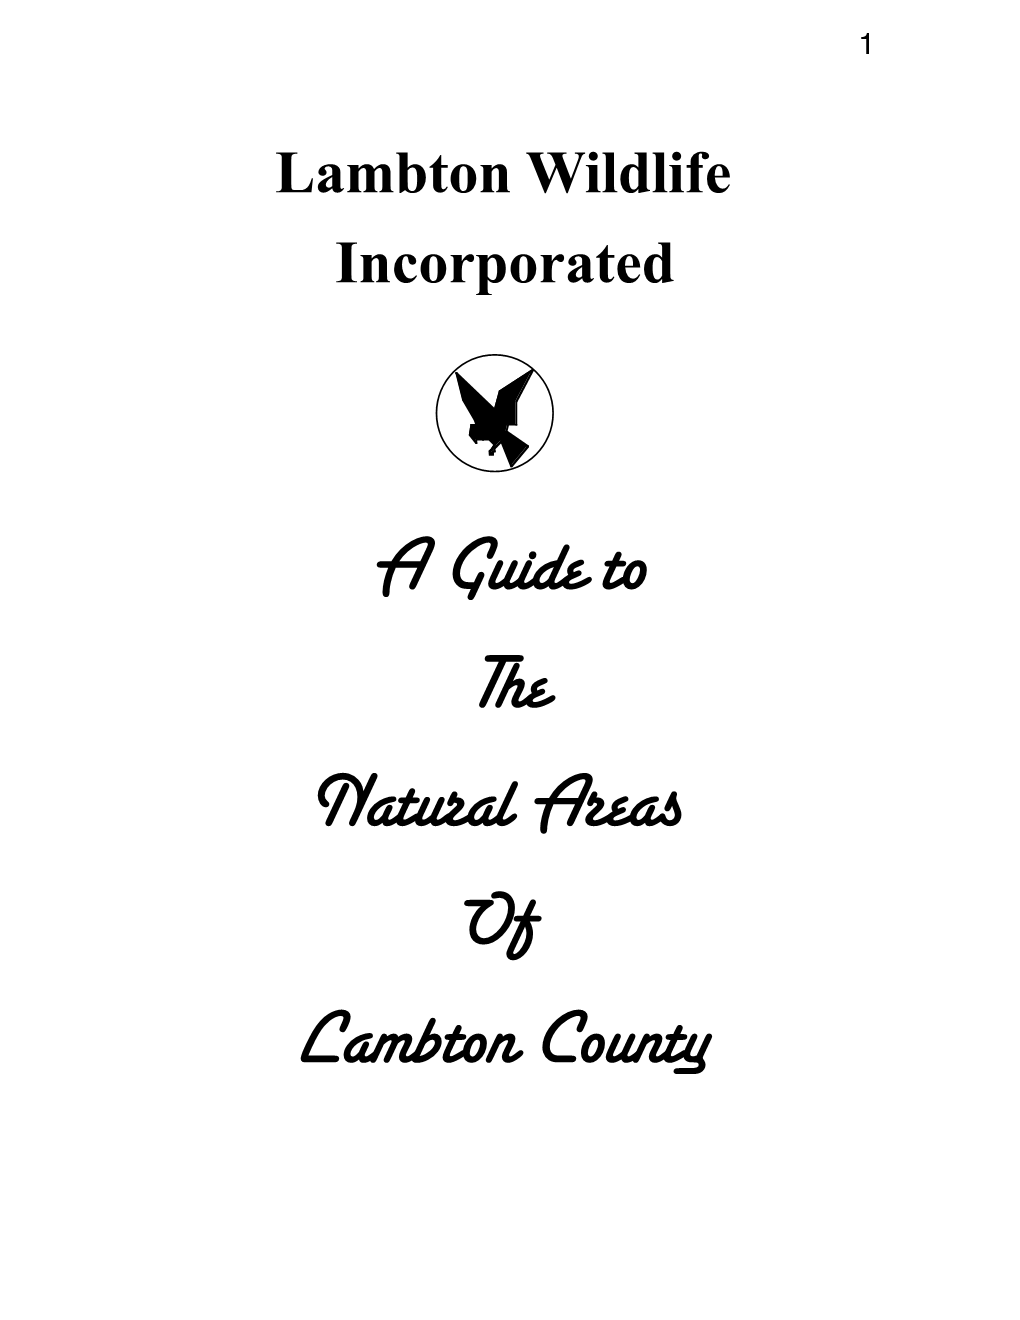 A Guide to the Natural Areas of Lambton County